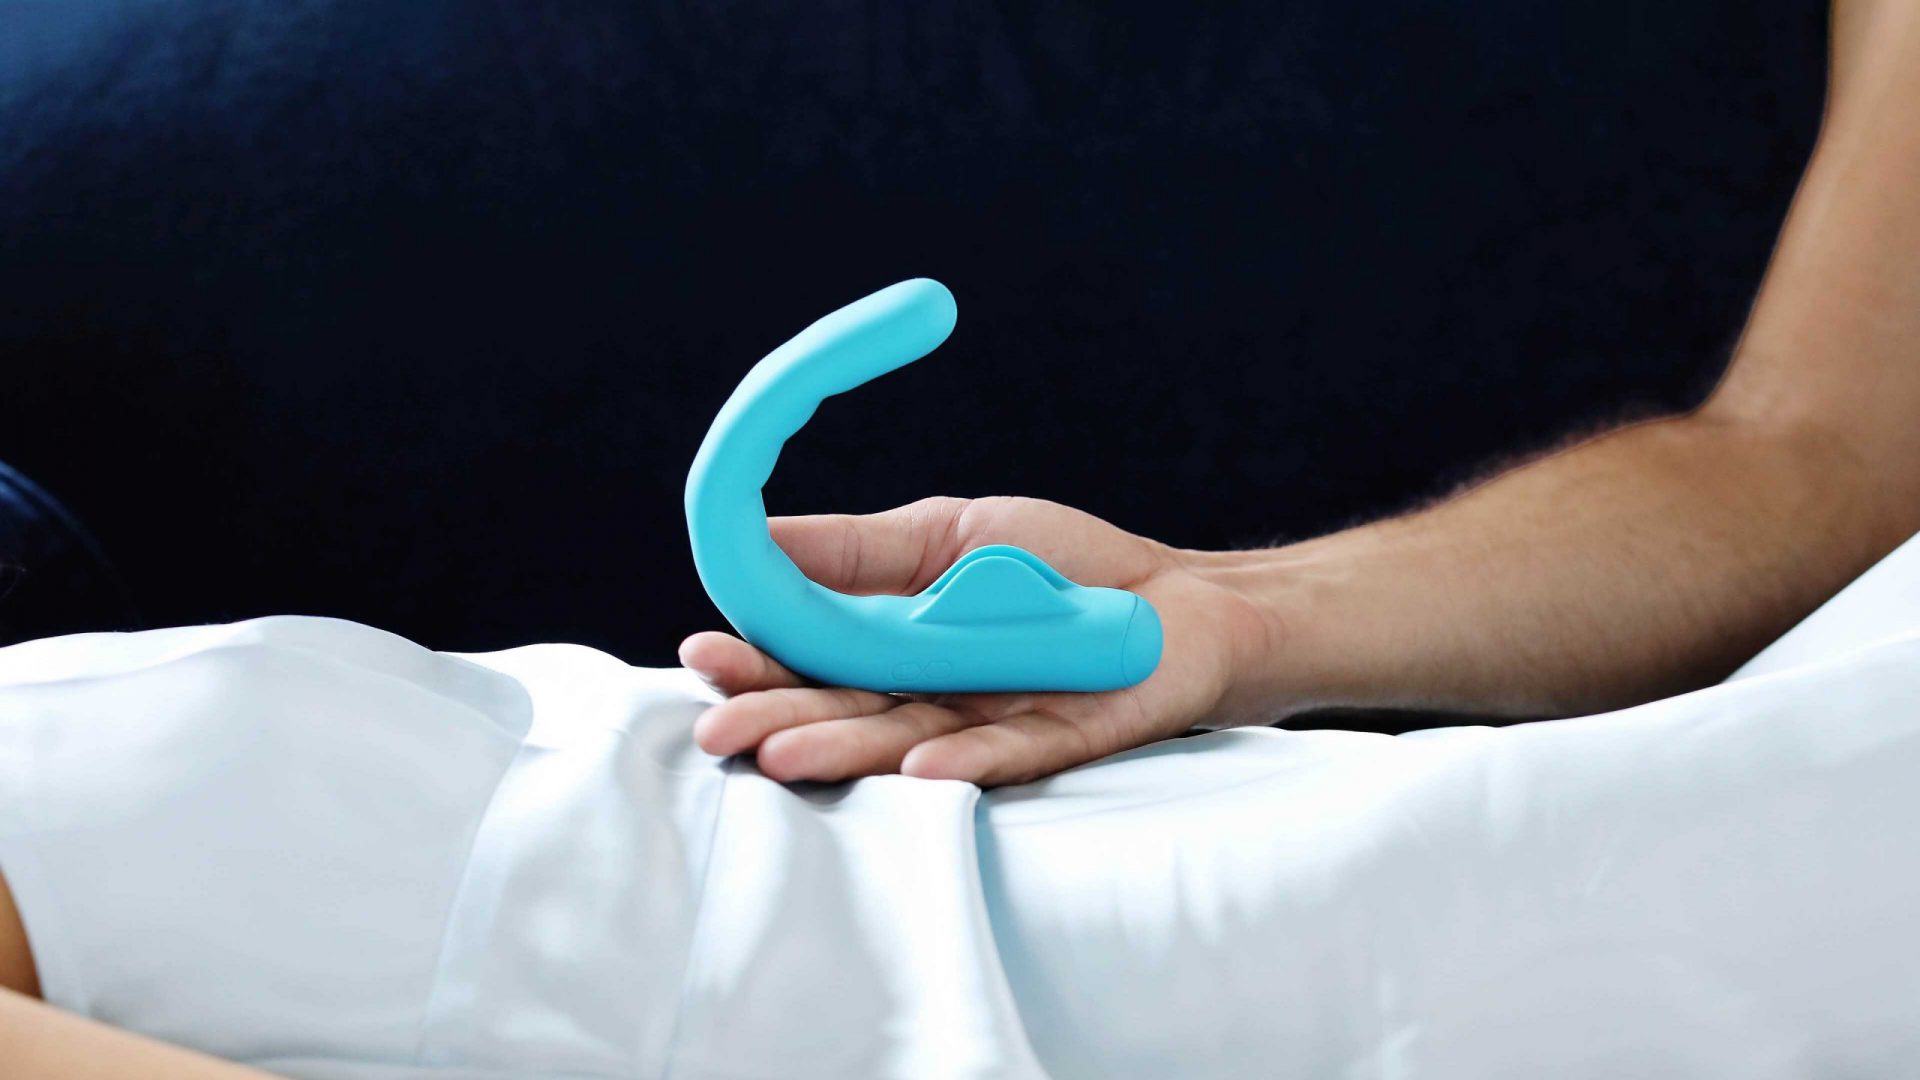 Sex toy designs 10 products for you to get inspired DesignWanted pic